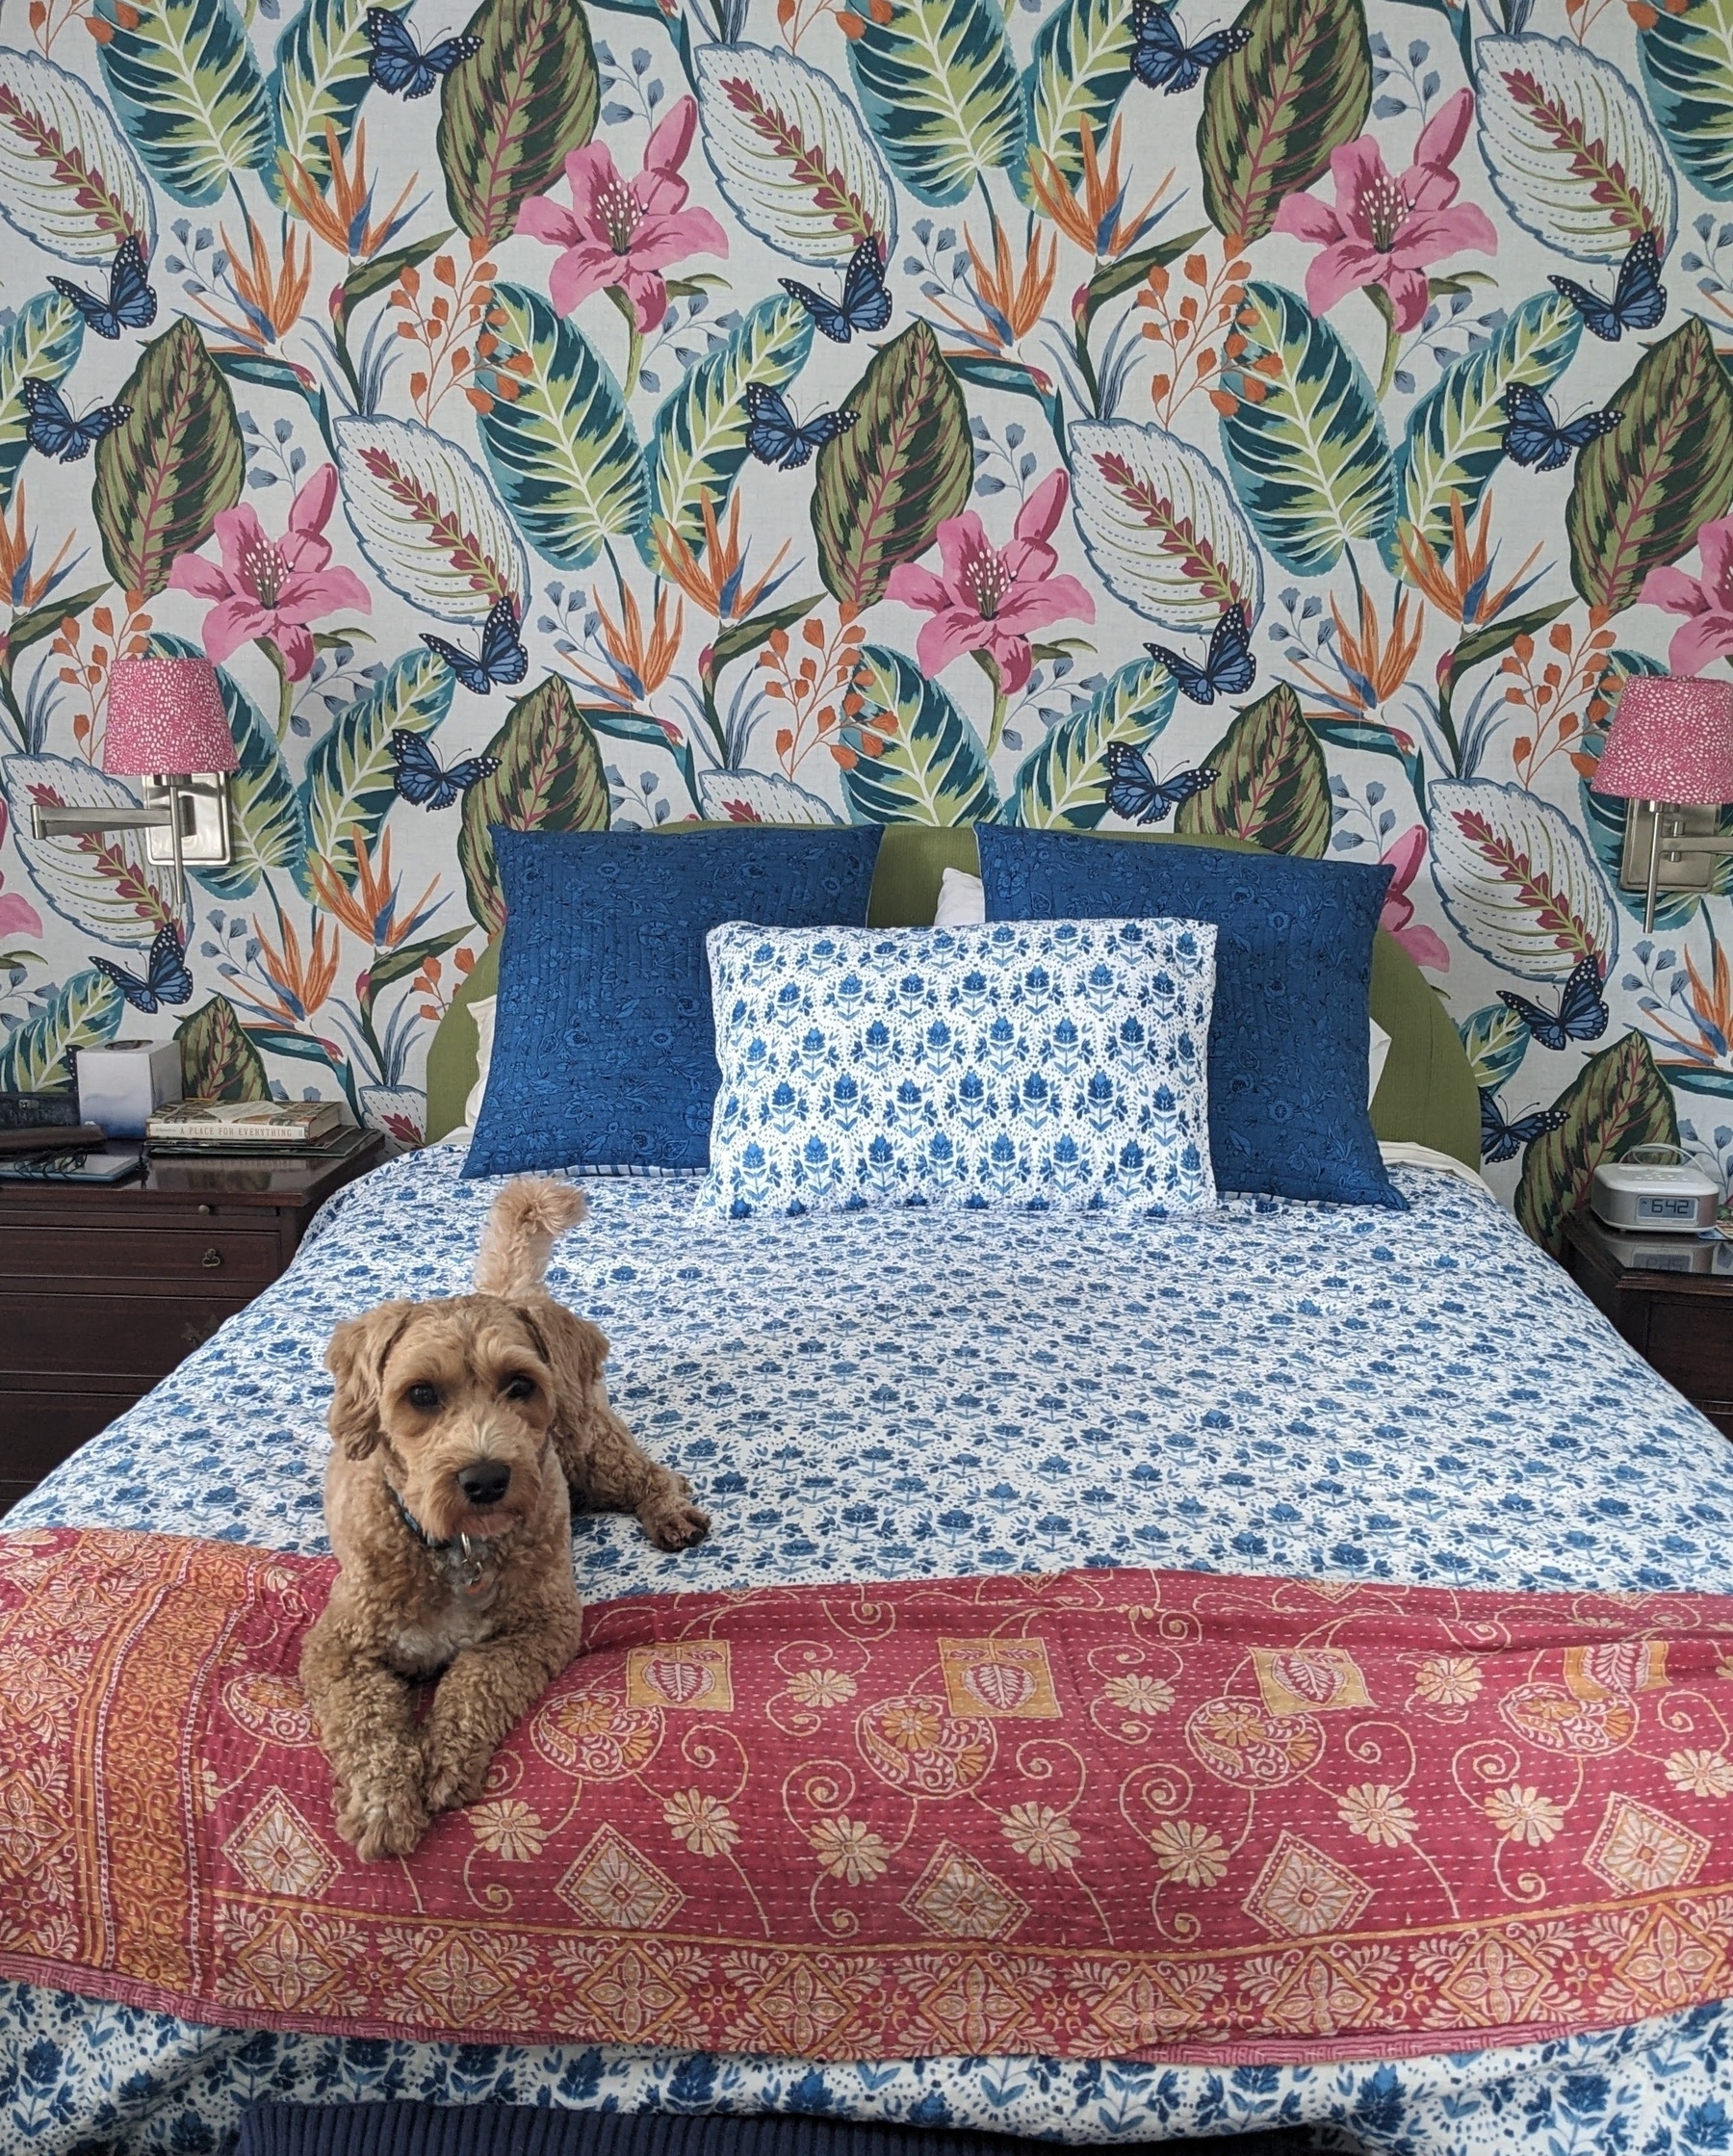 bedroom with giant green leaves and pink flowers on the wall, a blue flowered bedspread, an orange small blanket, blue pillows, and mini goldendoodle dog sitting on the bed